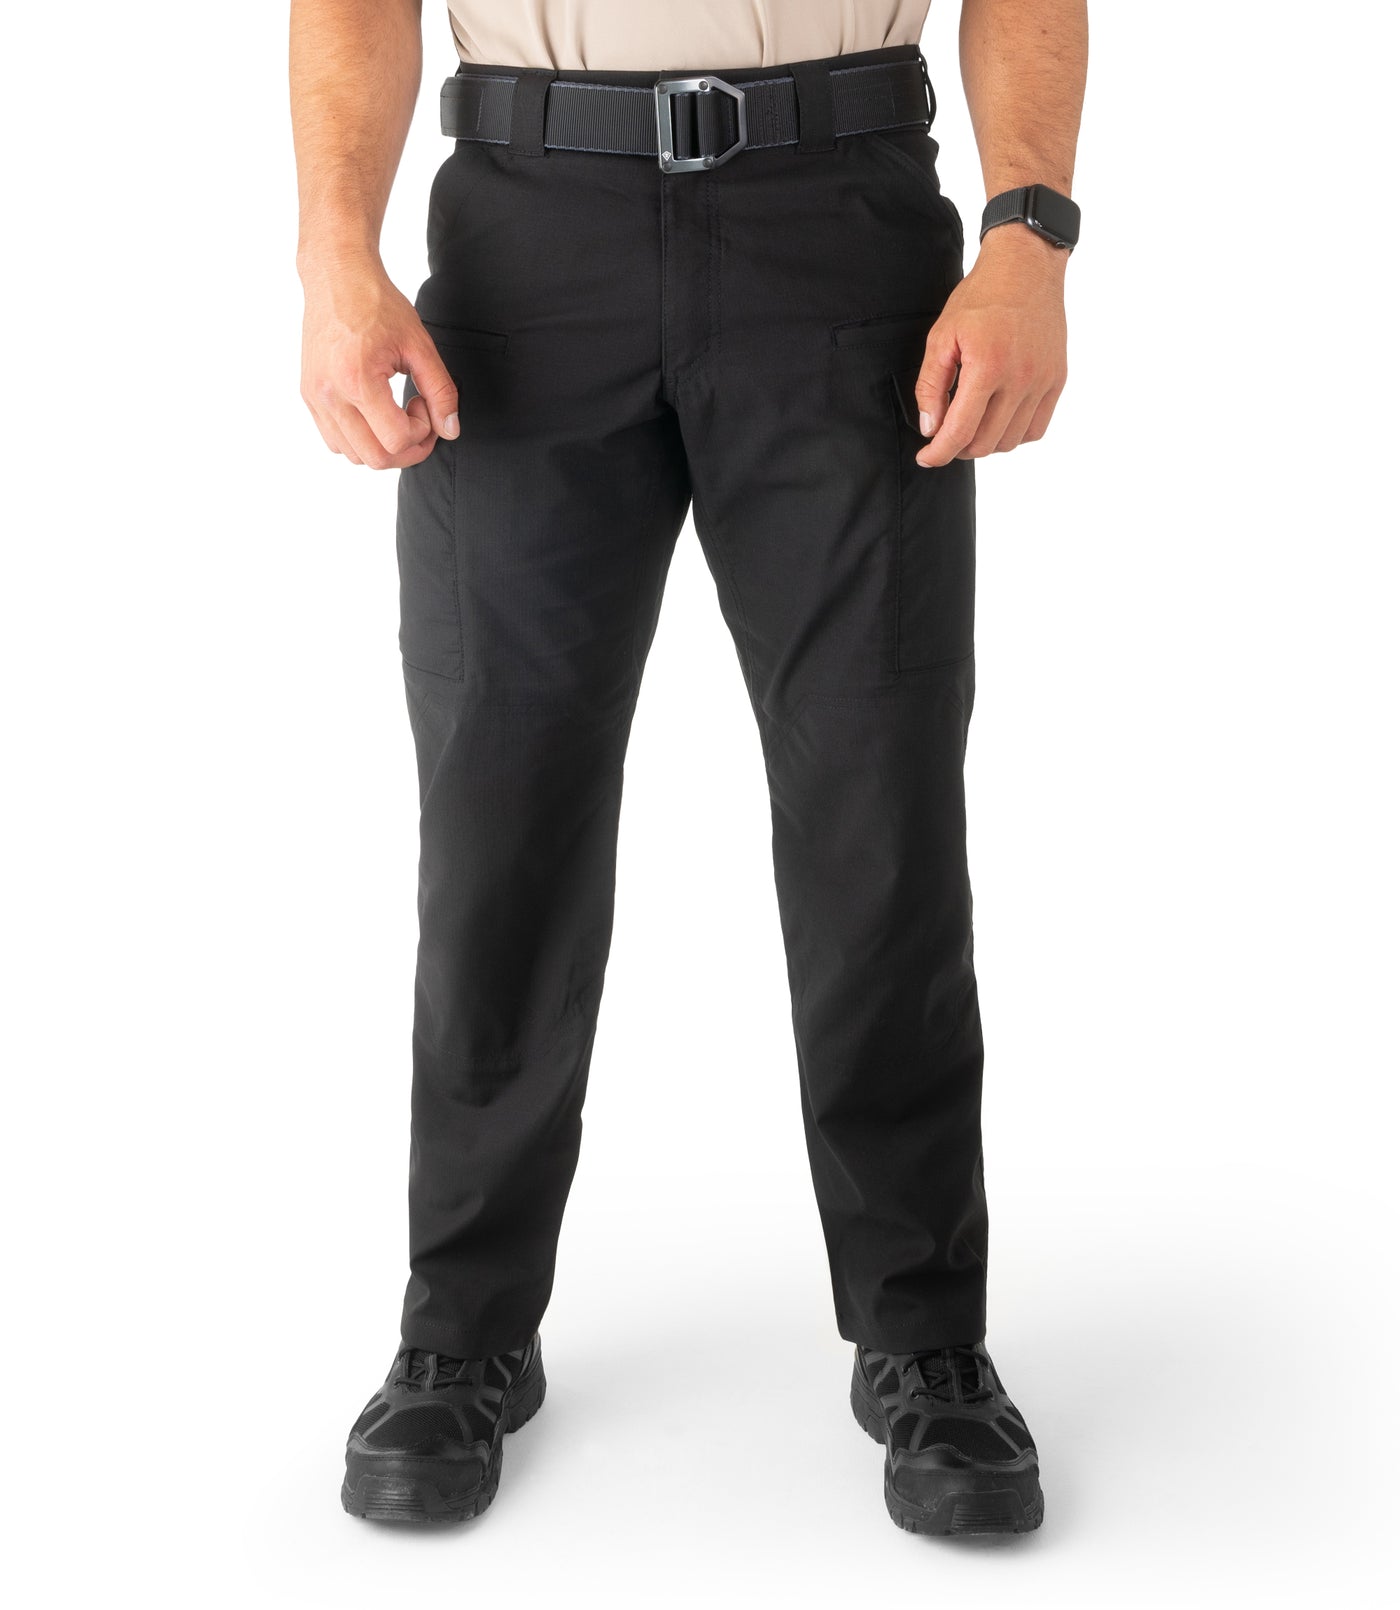 The V2 – Tactical Pant First Tactical